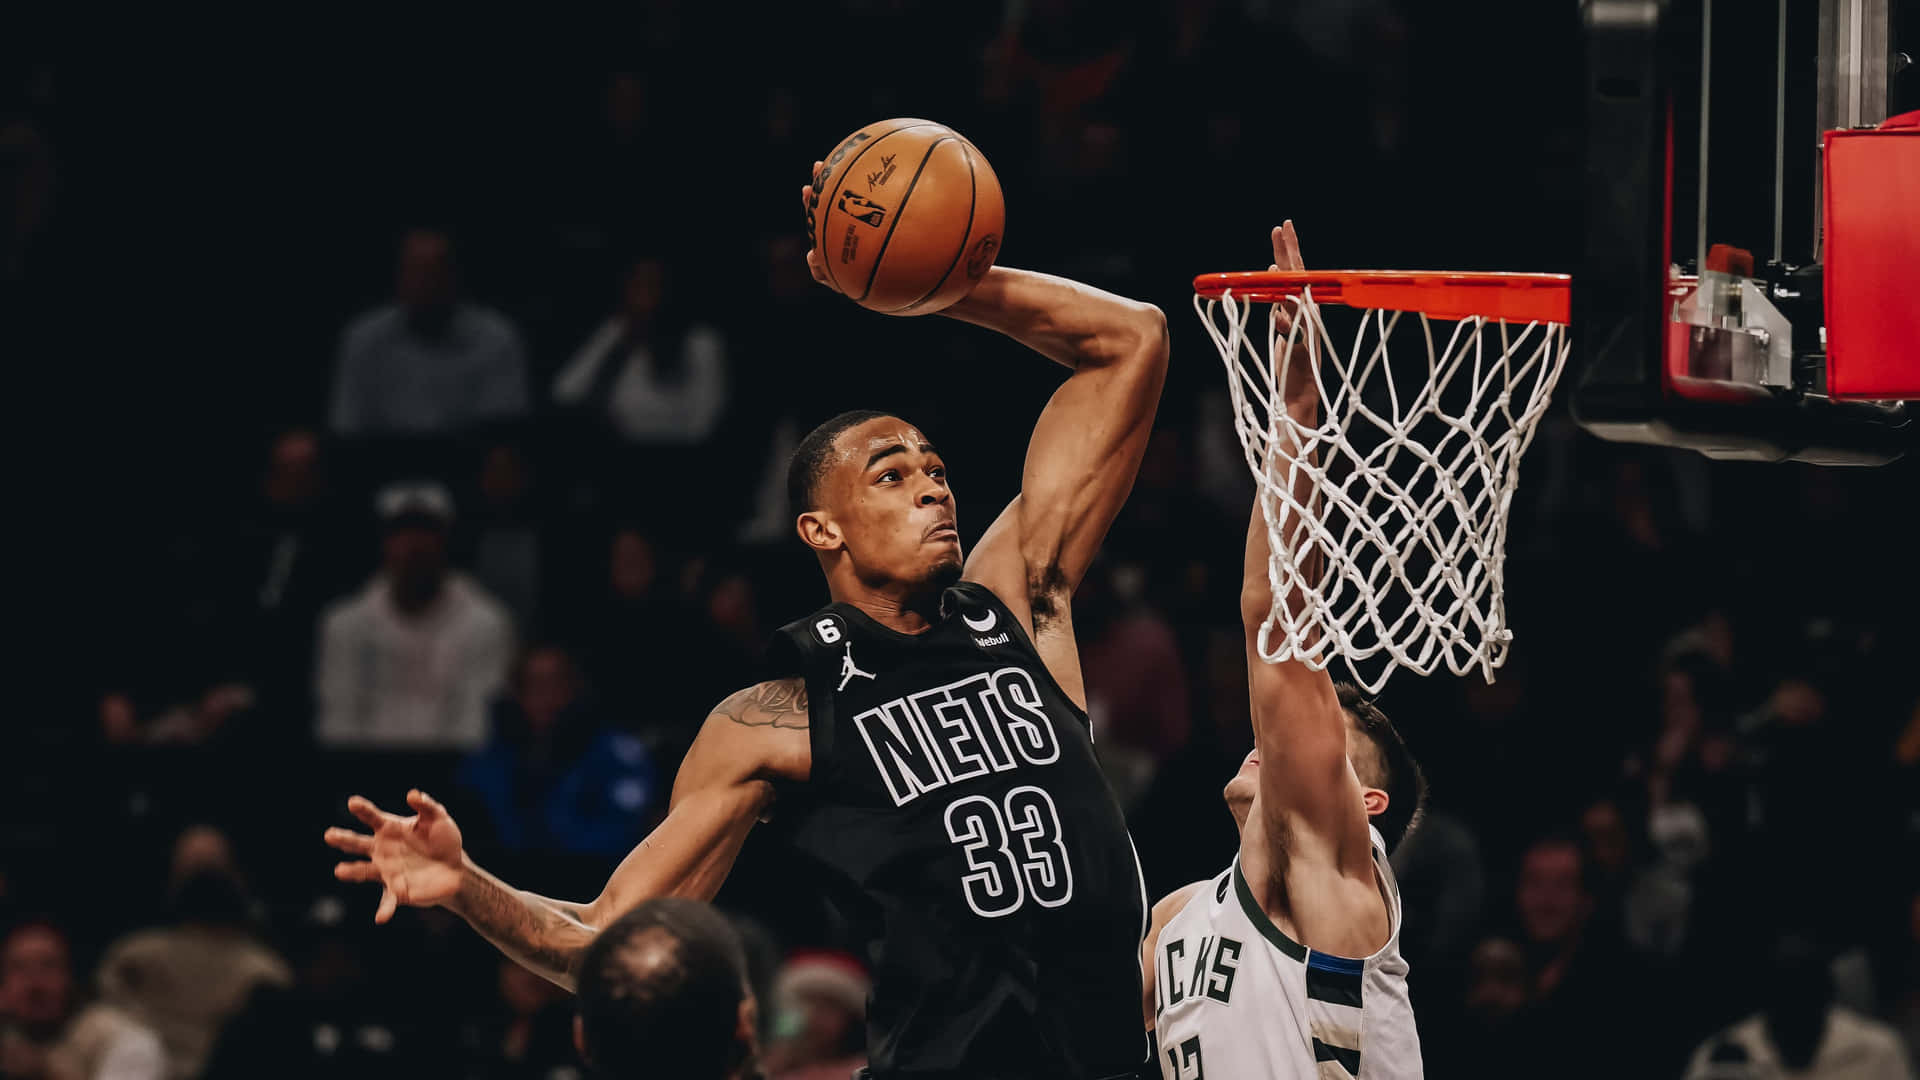 Nets Player Dunking During Game Wallpaper